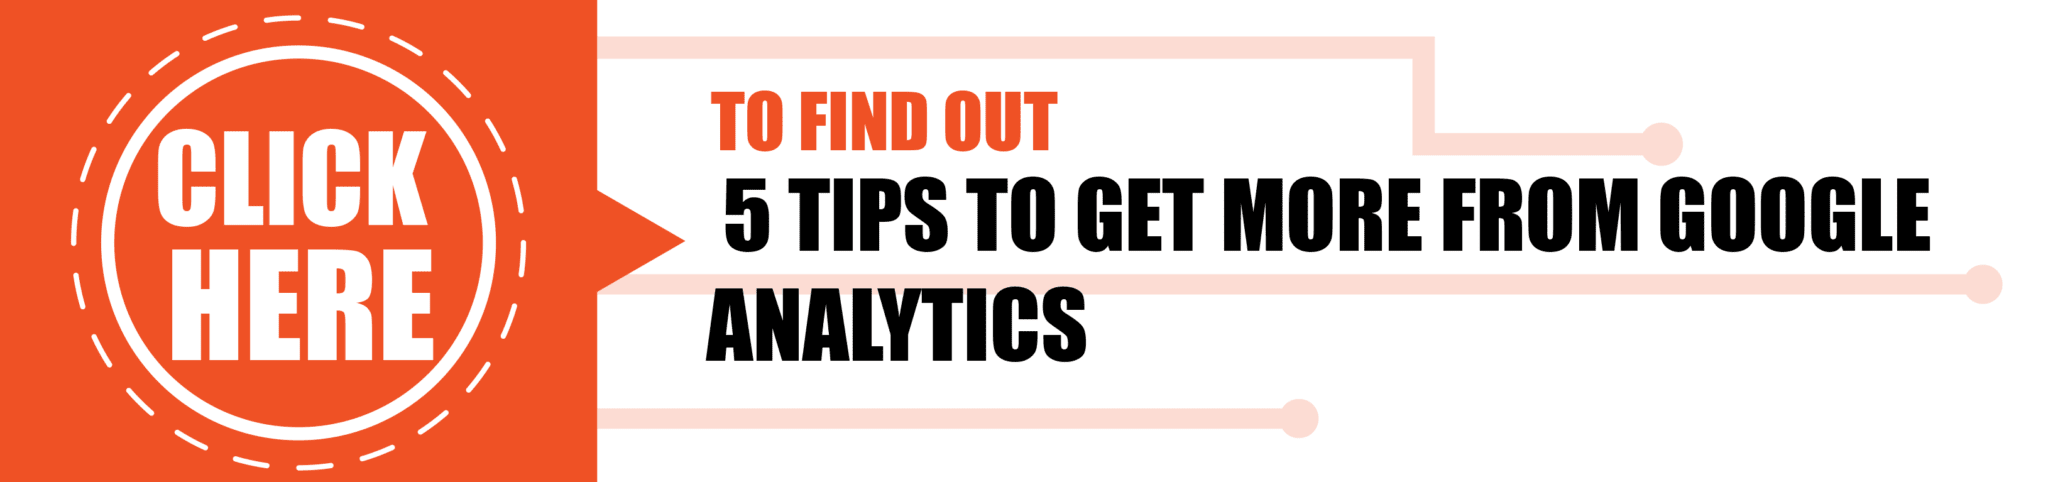 5 Tips to Get More from Google Analytics